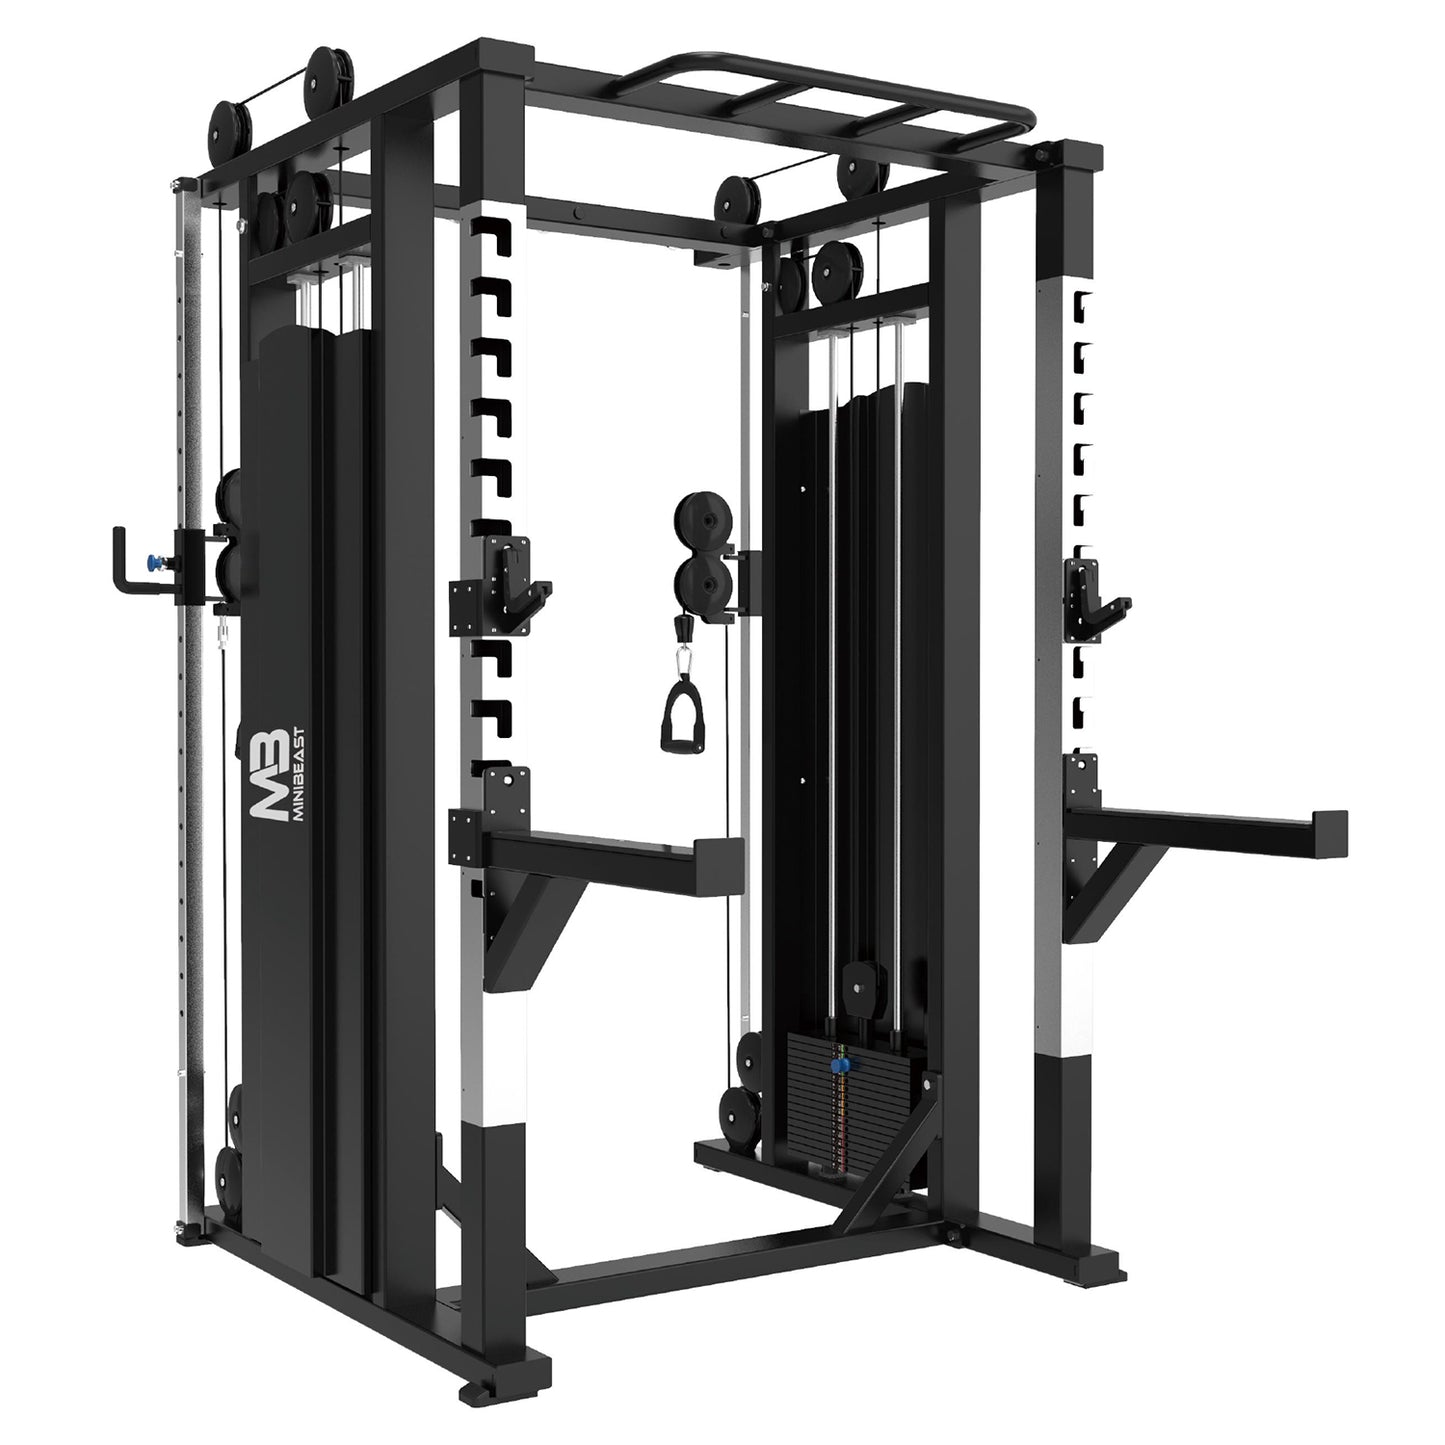 MBTB - Functional trainer and squat rack